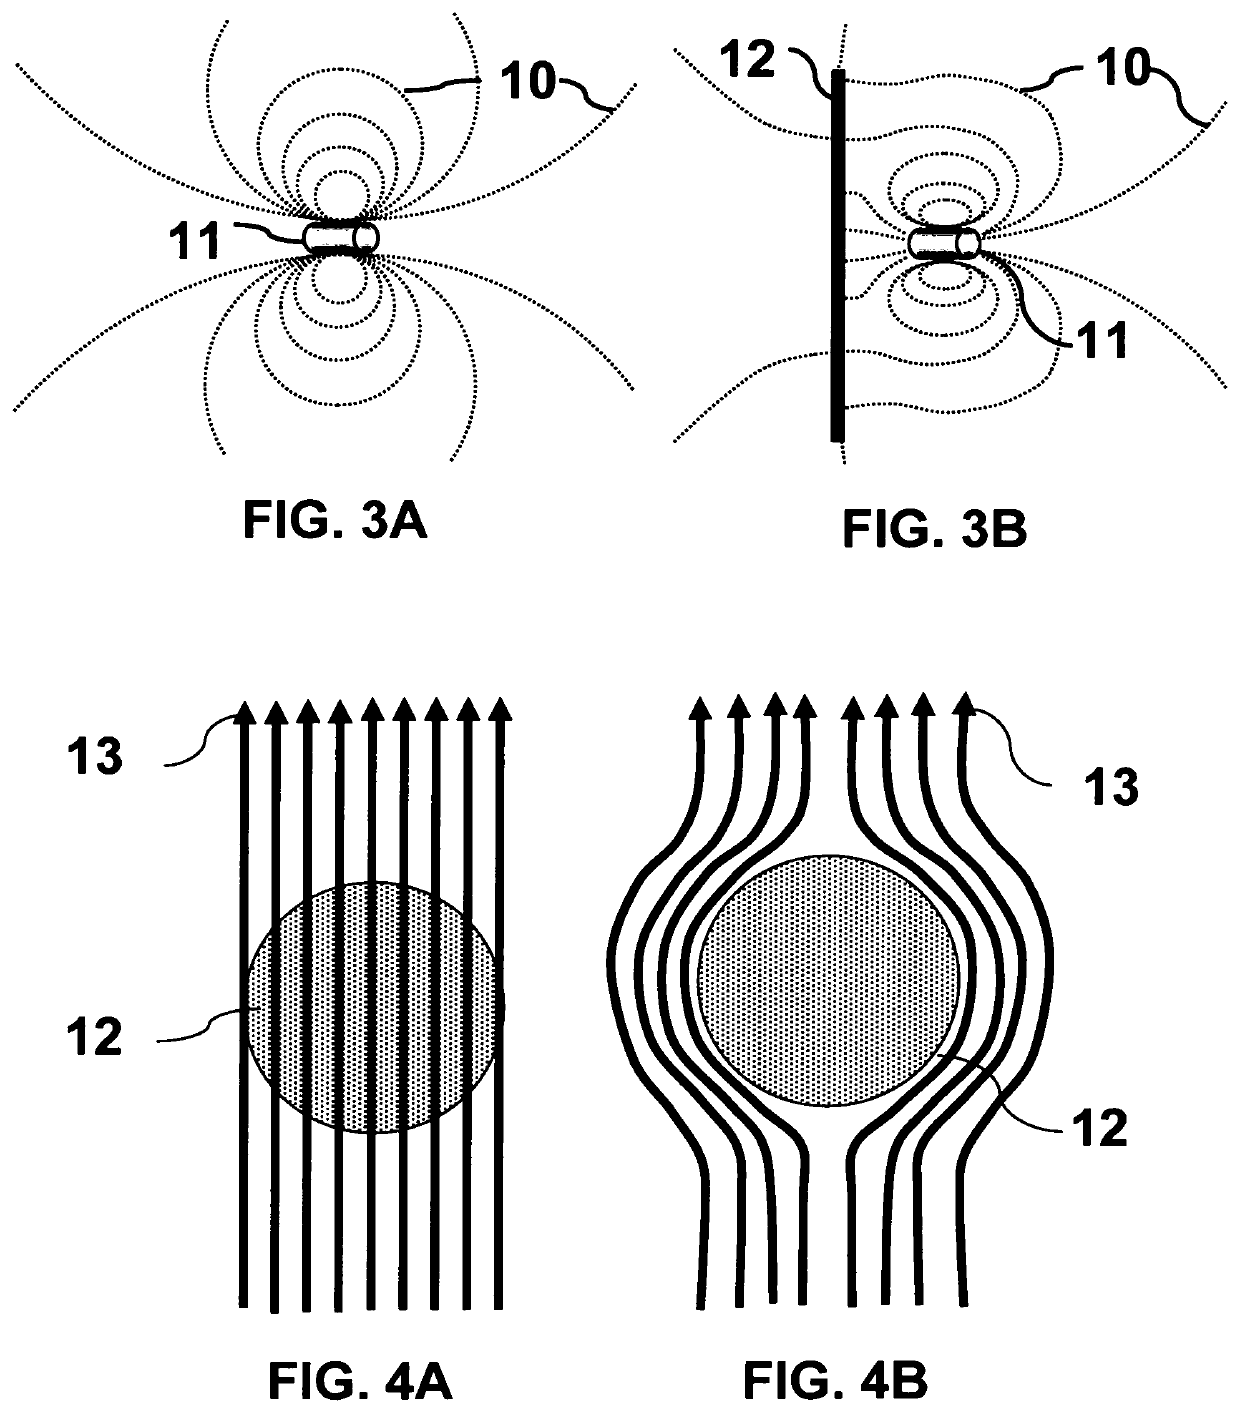 Segmented current magnetic field propulsion system